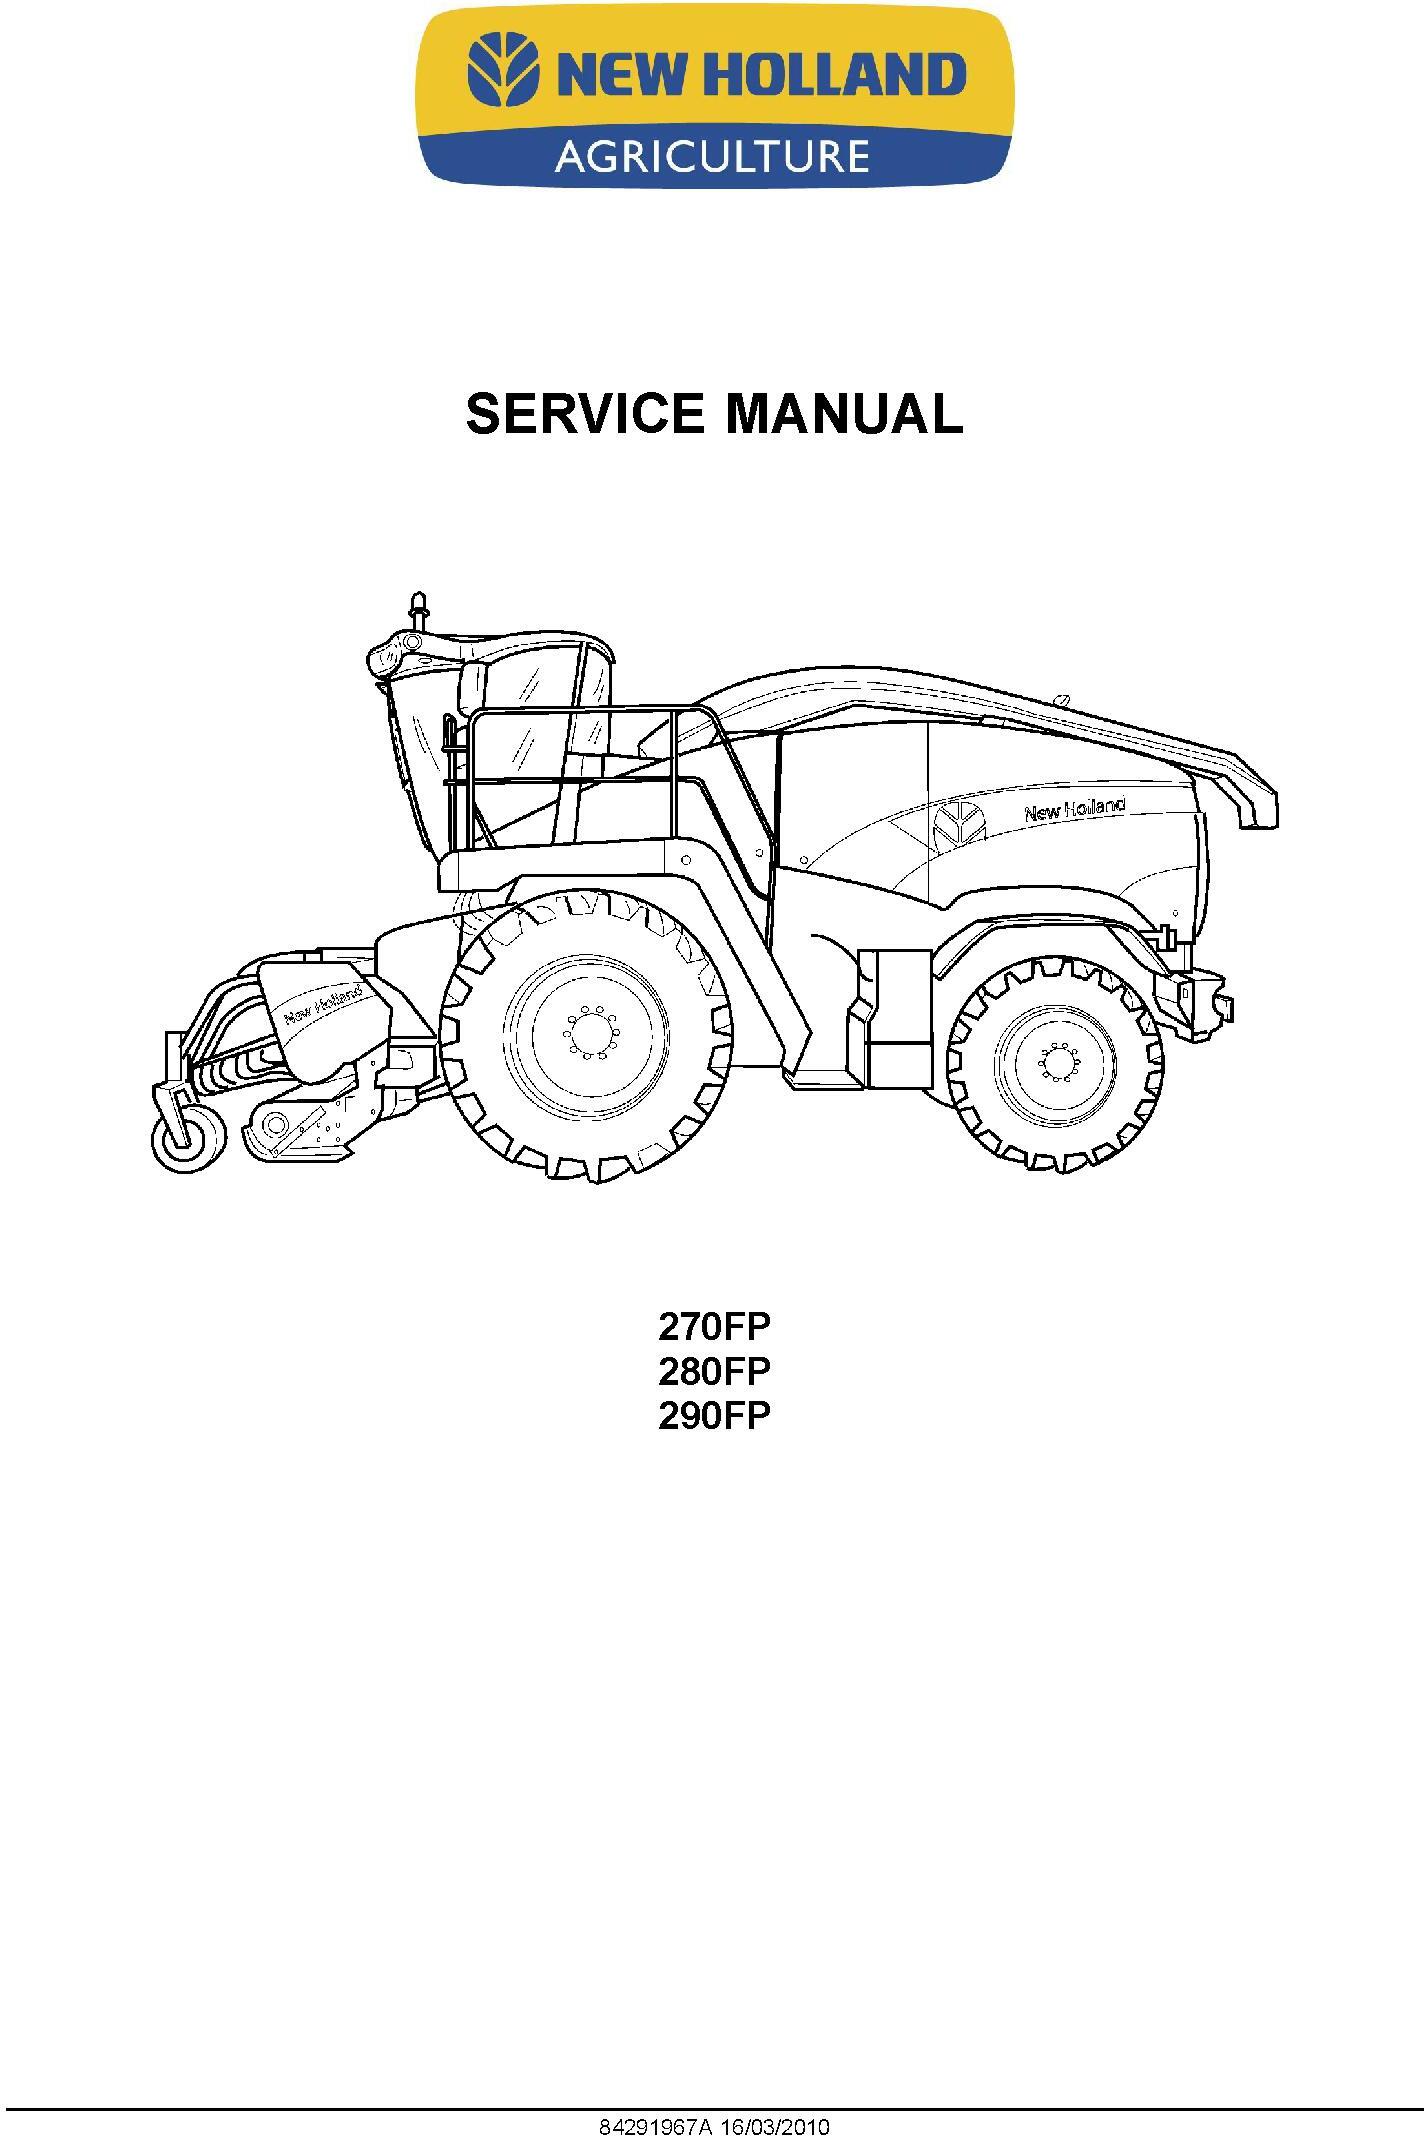 New Holland 270FP, 280FP, 290FP Self Propelled Forage Pickup Headers Service Manual - 1